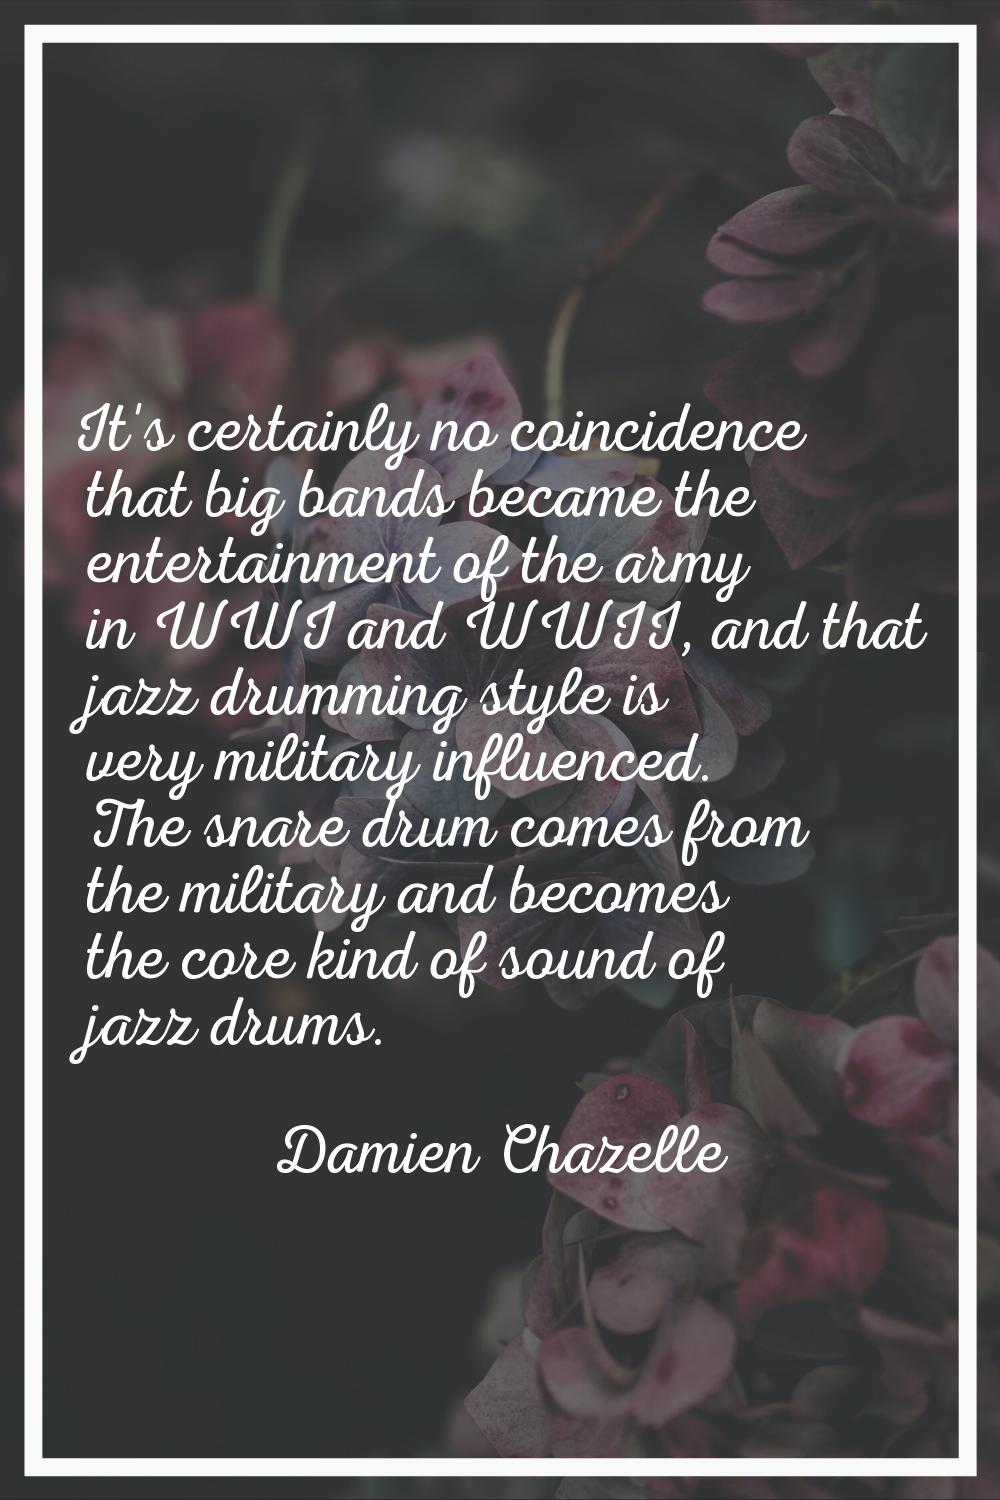 It's certainly no coincidence that big bands became the entertainment of the army in WWI and WWII, 